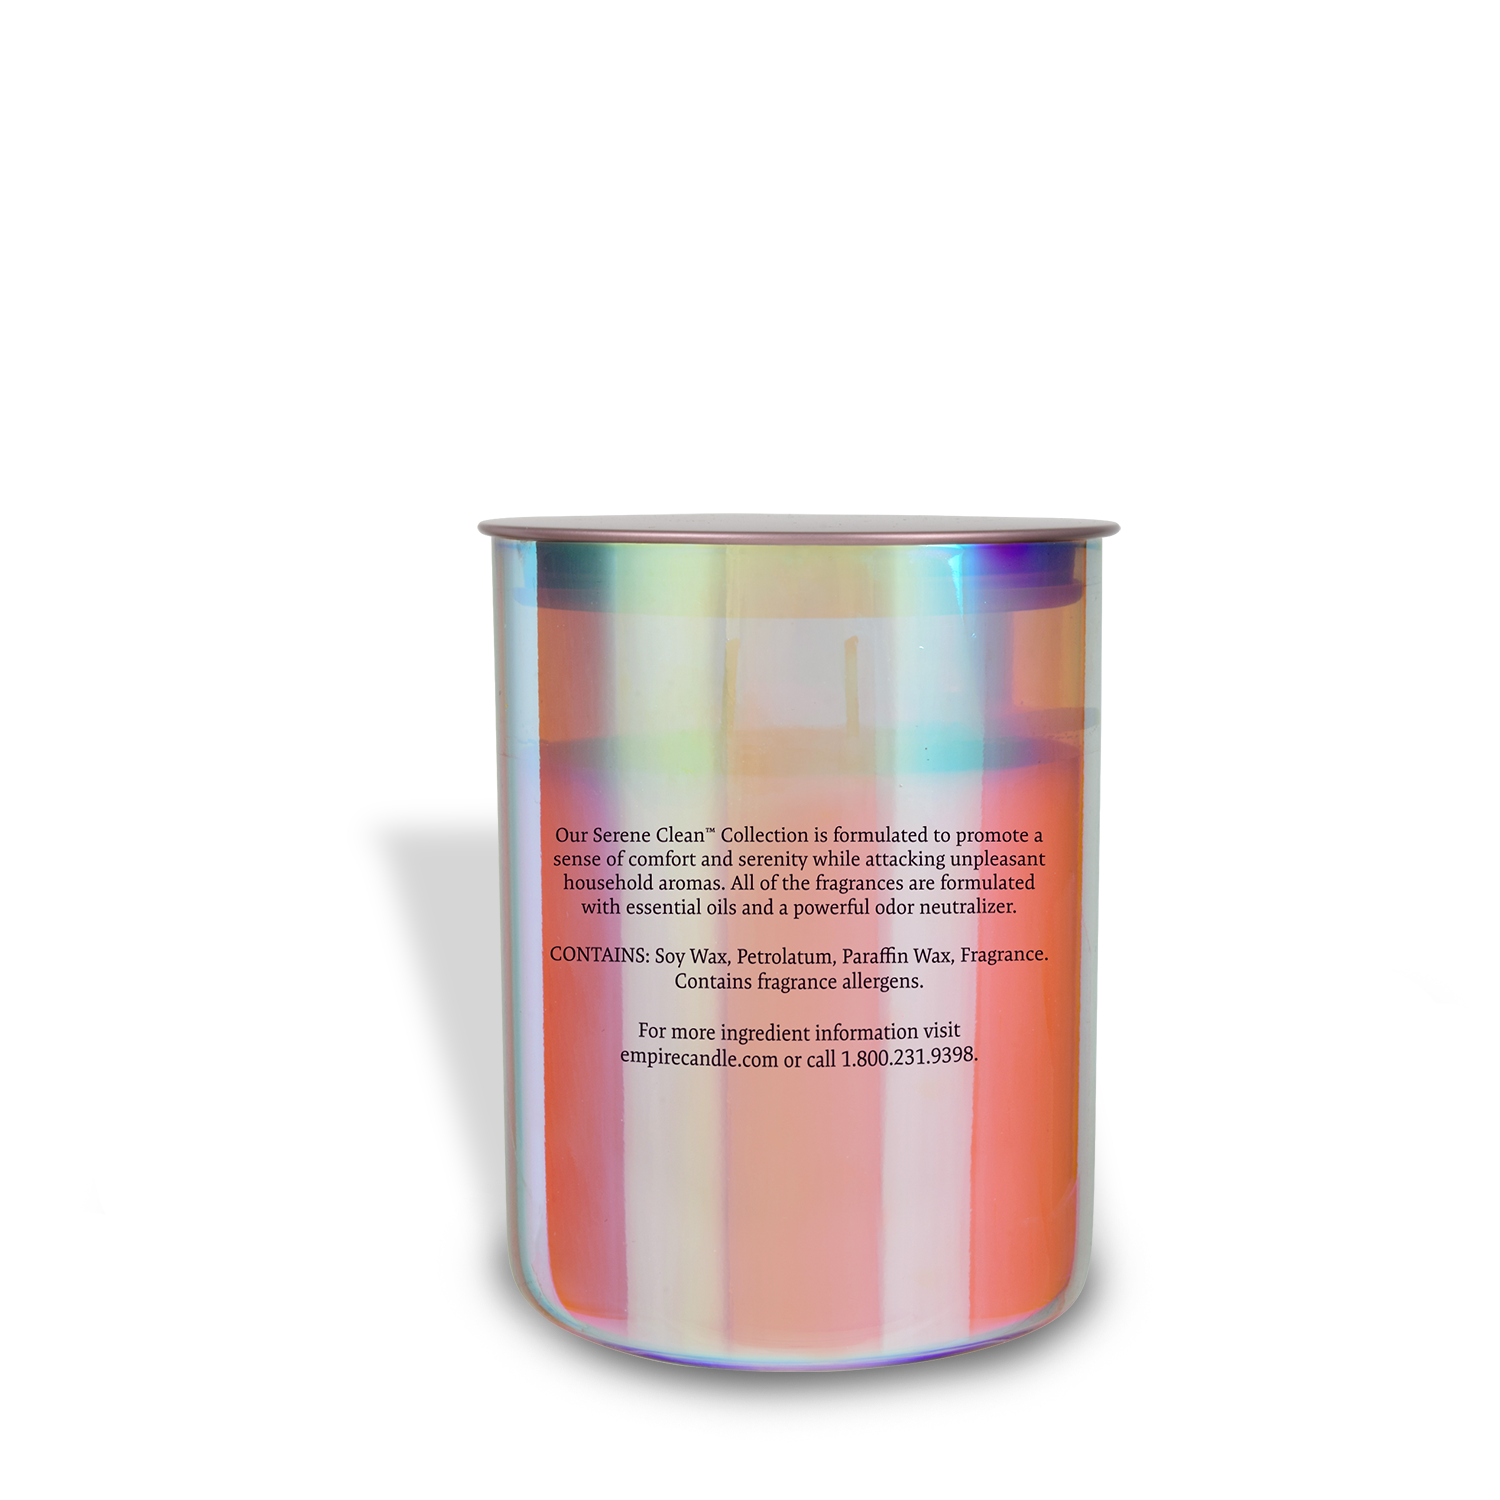 A tin container with an iridescent label on it, containing an Amber Vanilla Scented Jar Candle (12 oz) from the Serene Clean Collection by Tuscany Candle® EVD.